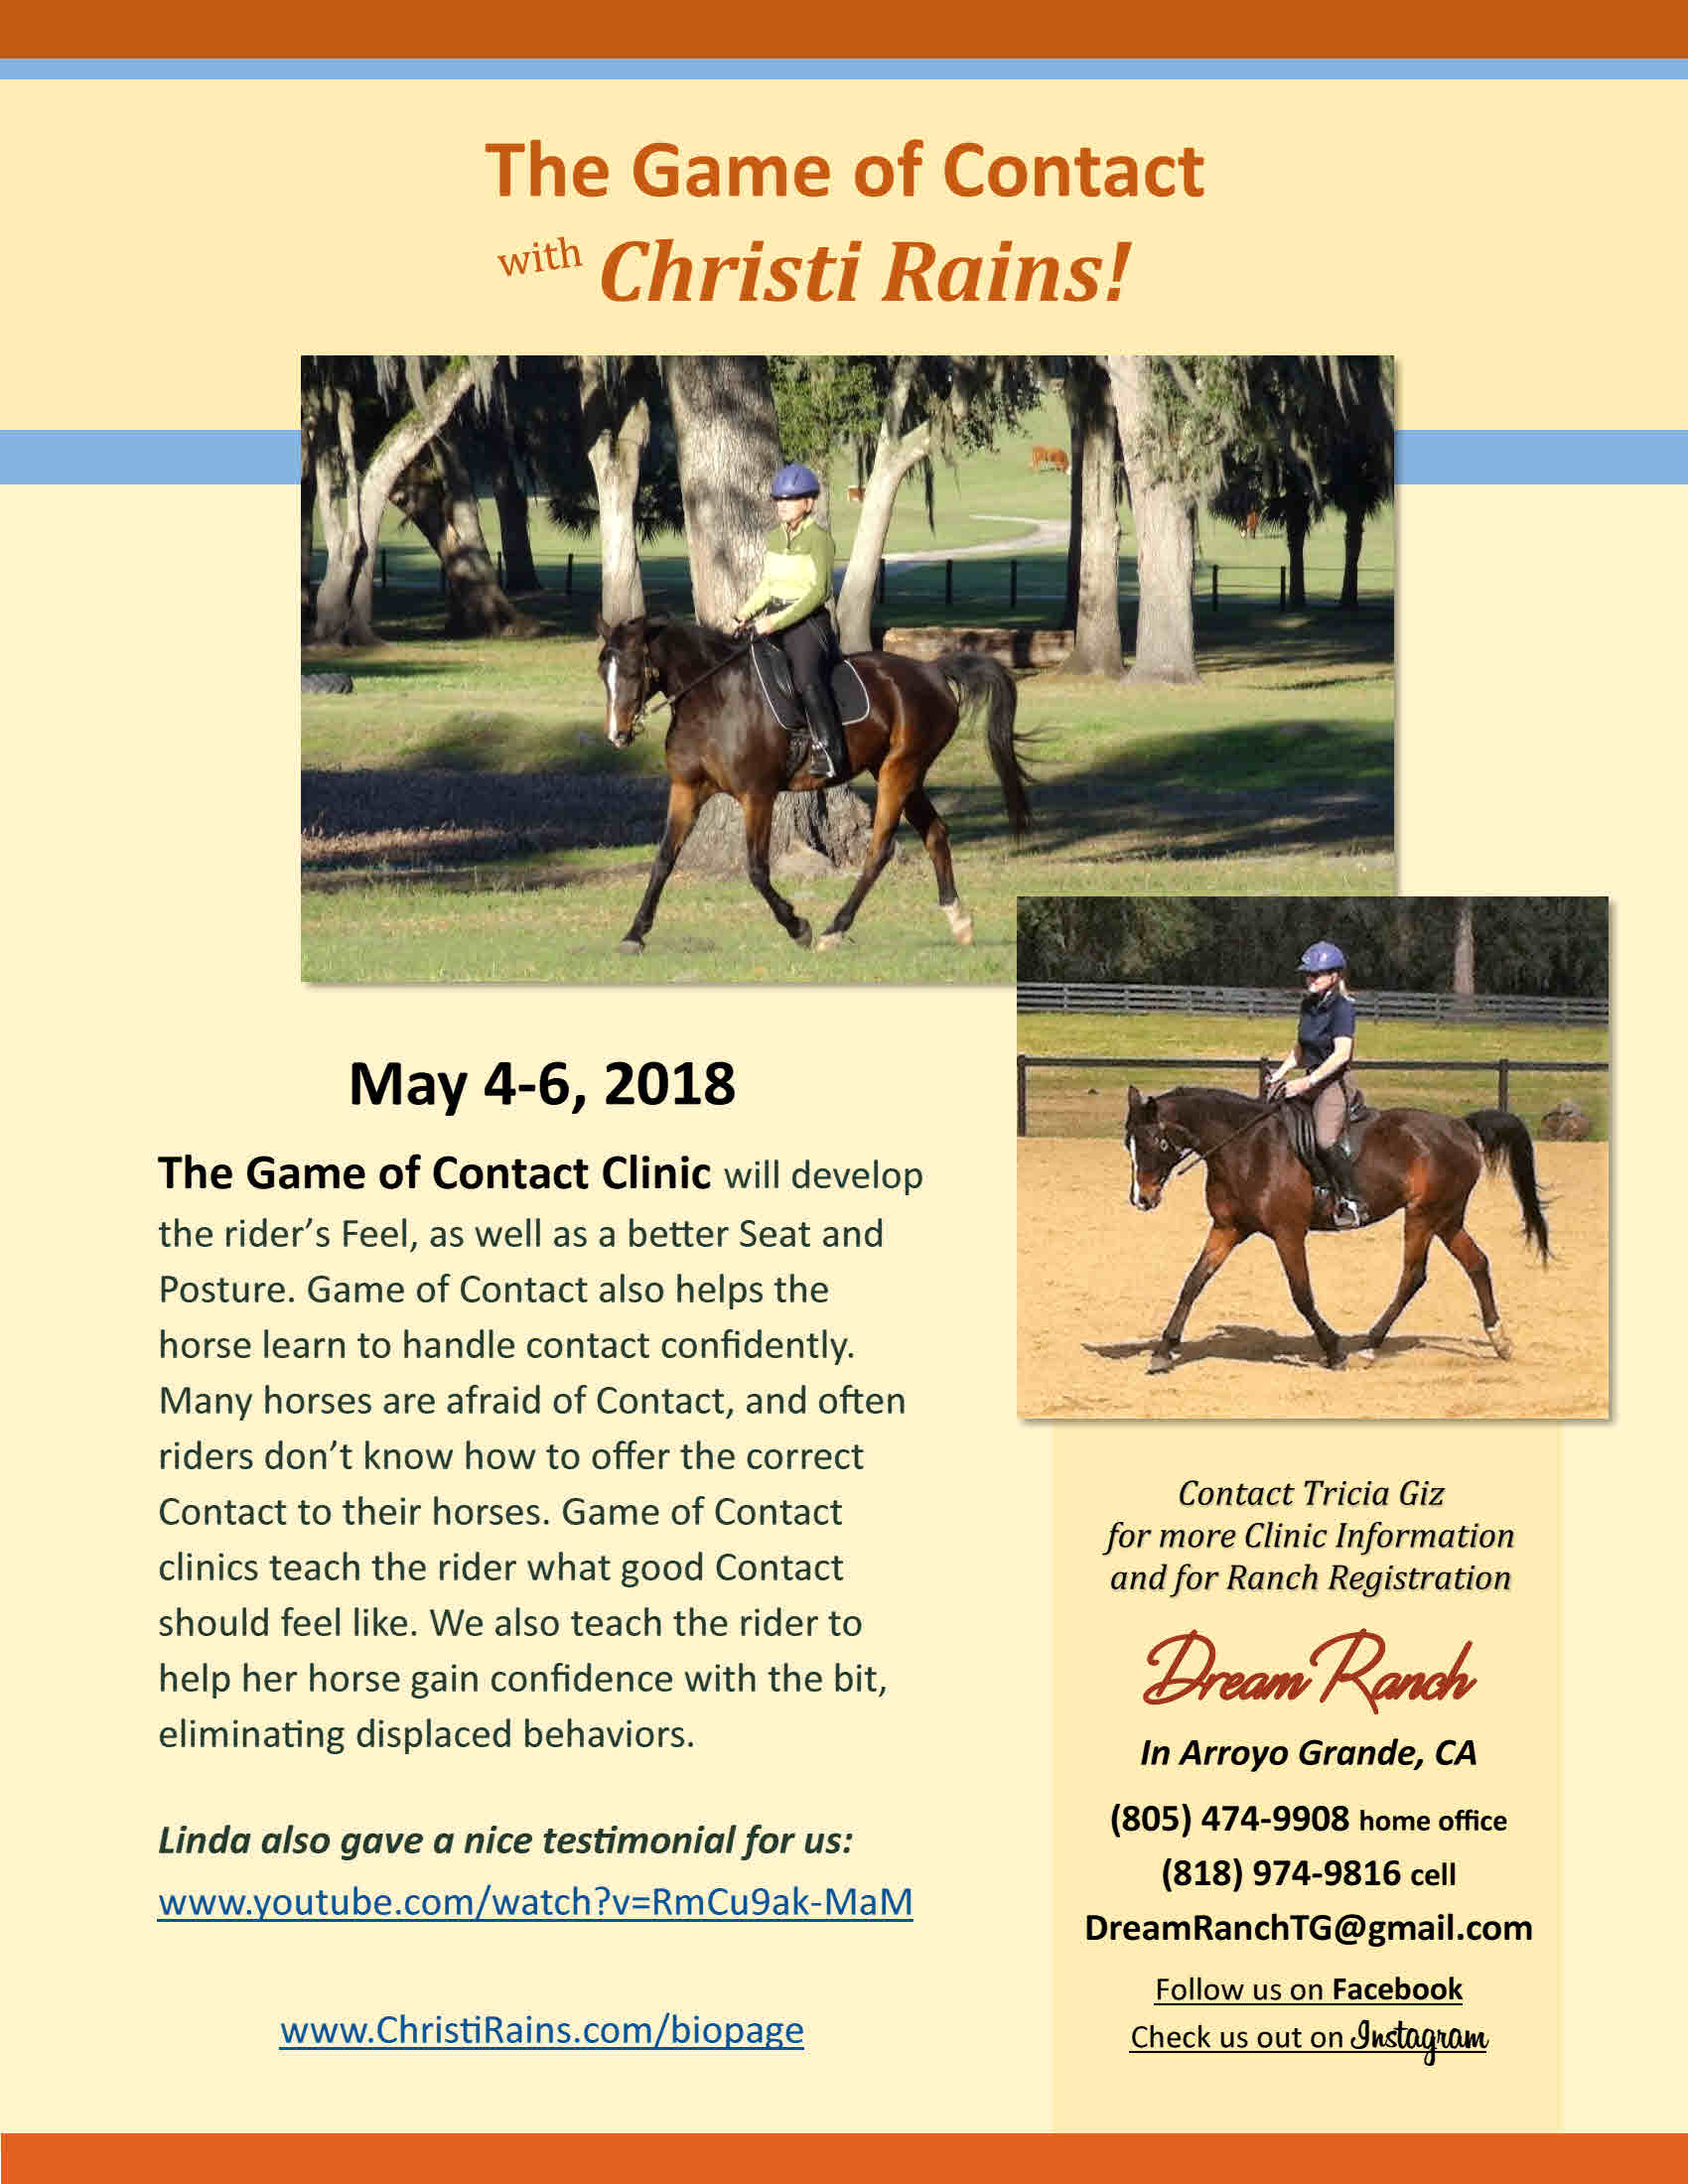 Apply the Game of Contact to Cowboy Dressage with Christi Rains | SLO Horse News